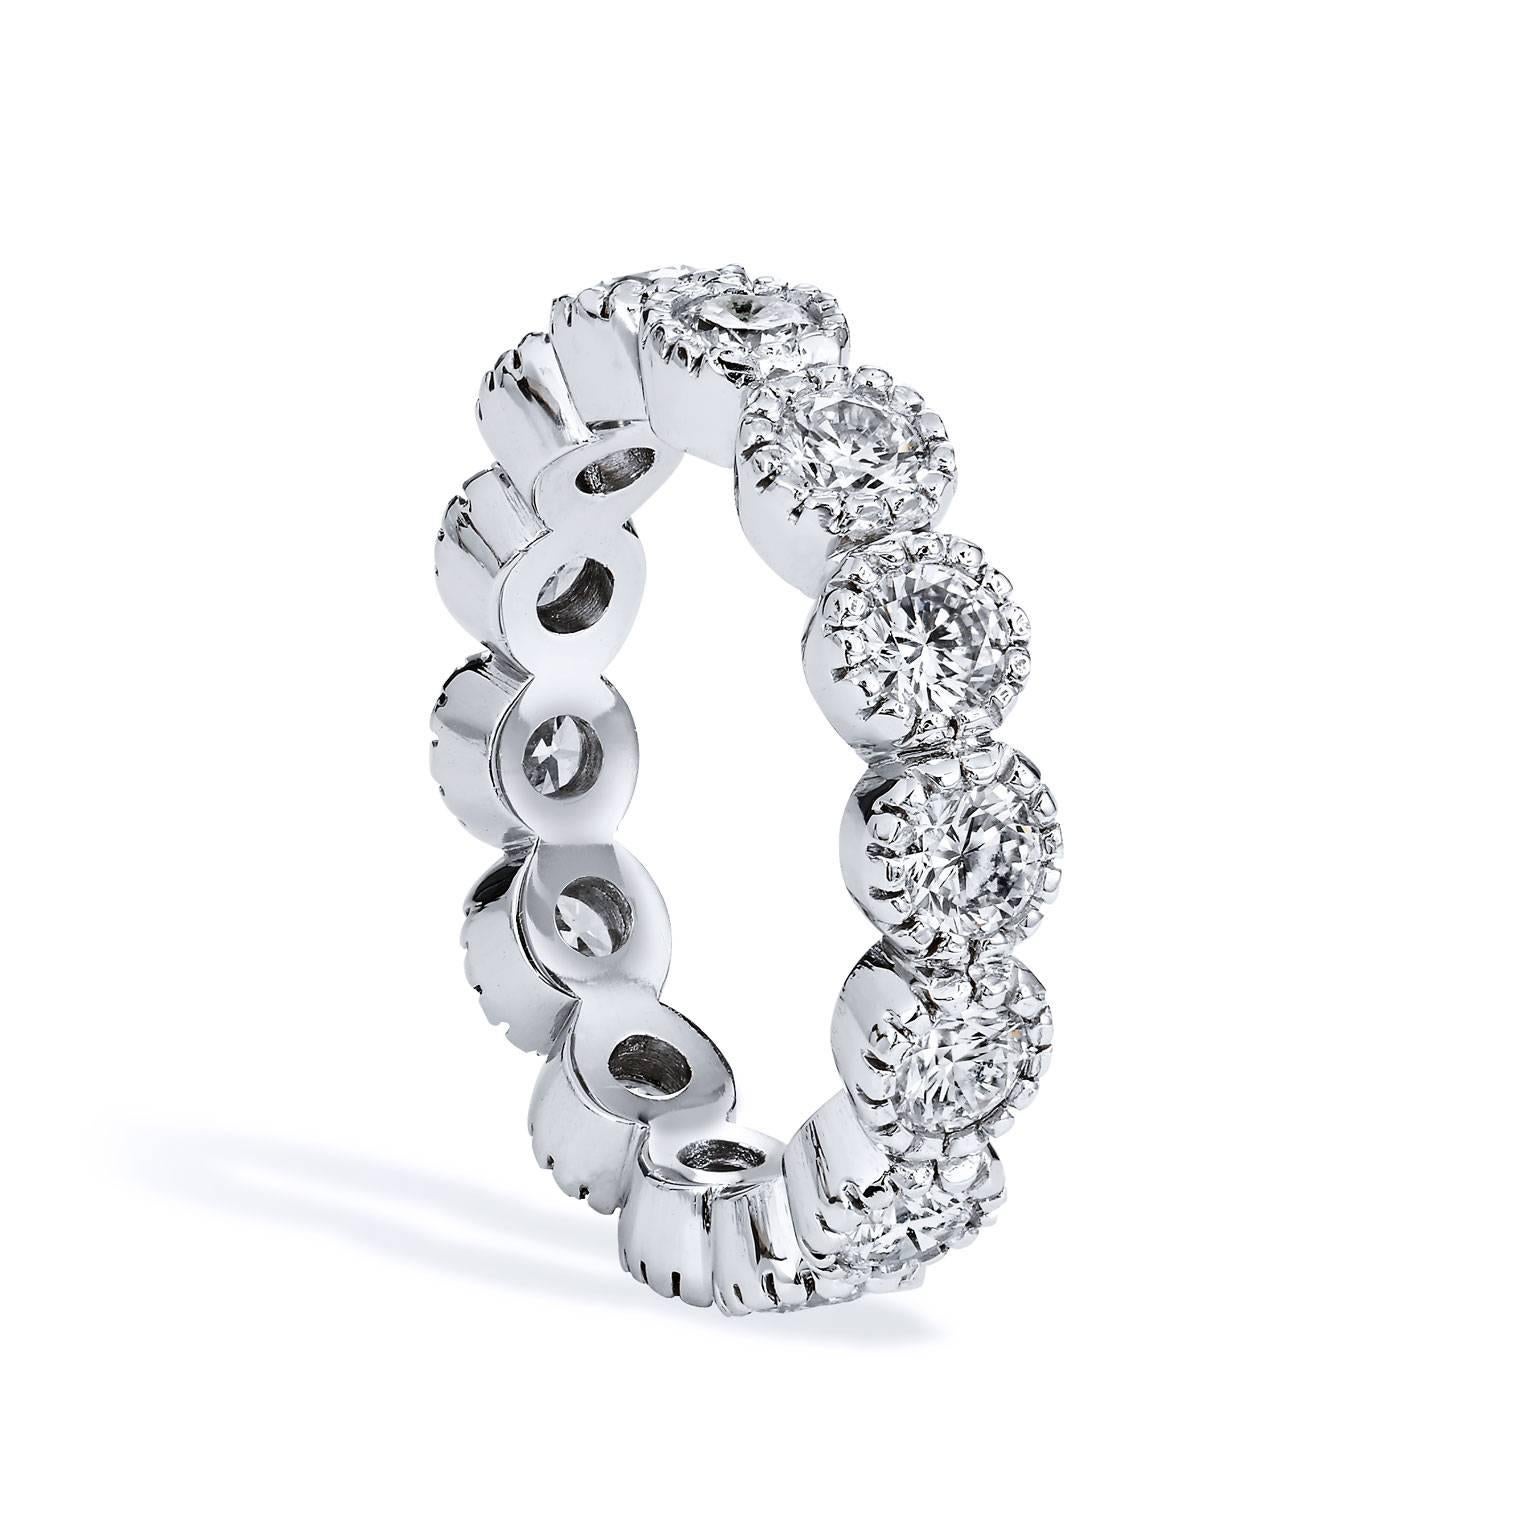 H&H Designed Wedding Band Created in platinum , with ten round brilliant cut diamonds encircling the finger. Each Diamond surrounded by a ring of platinum seeded in place by ten prongs.  Total Diamond weight of 1.70 Carats, the diamonds pop with